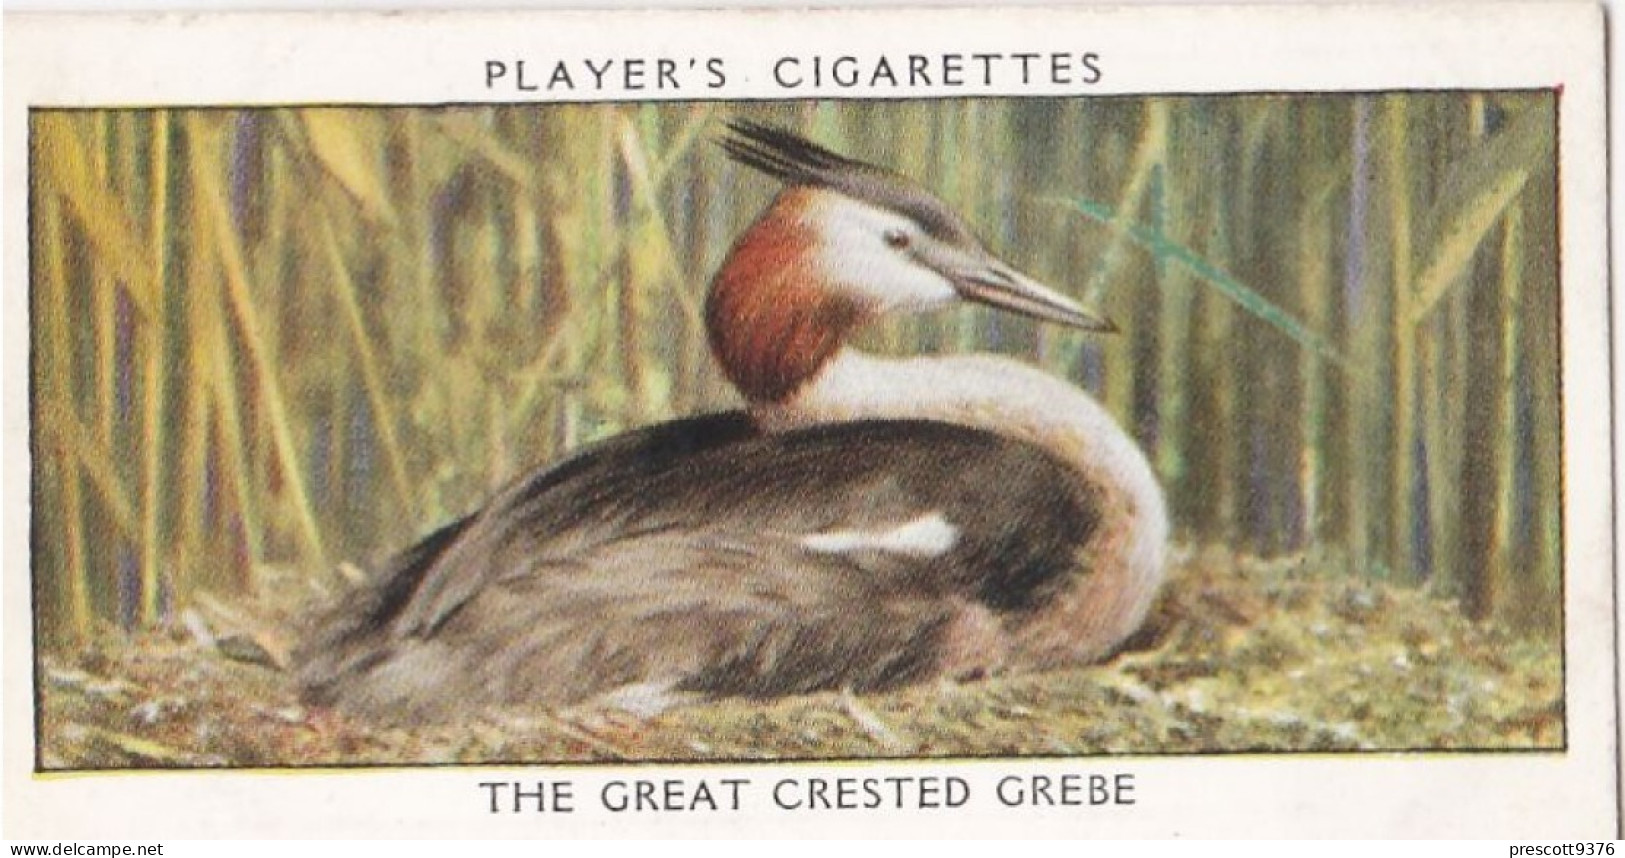 Wild Birds 1932 - Original Players Cigarette Card - 14 Great Crested Grebe - Player's